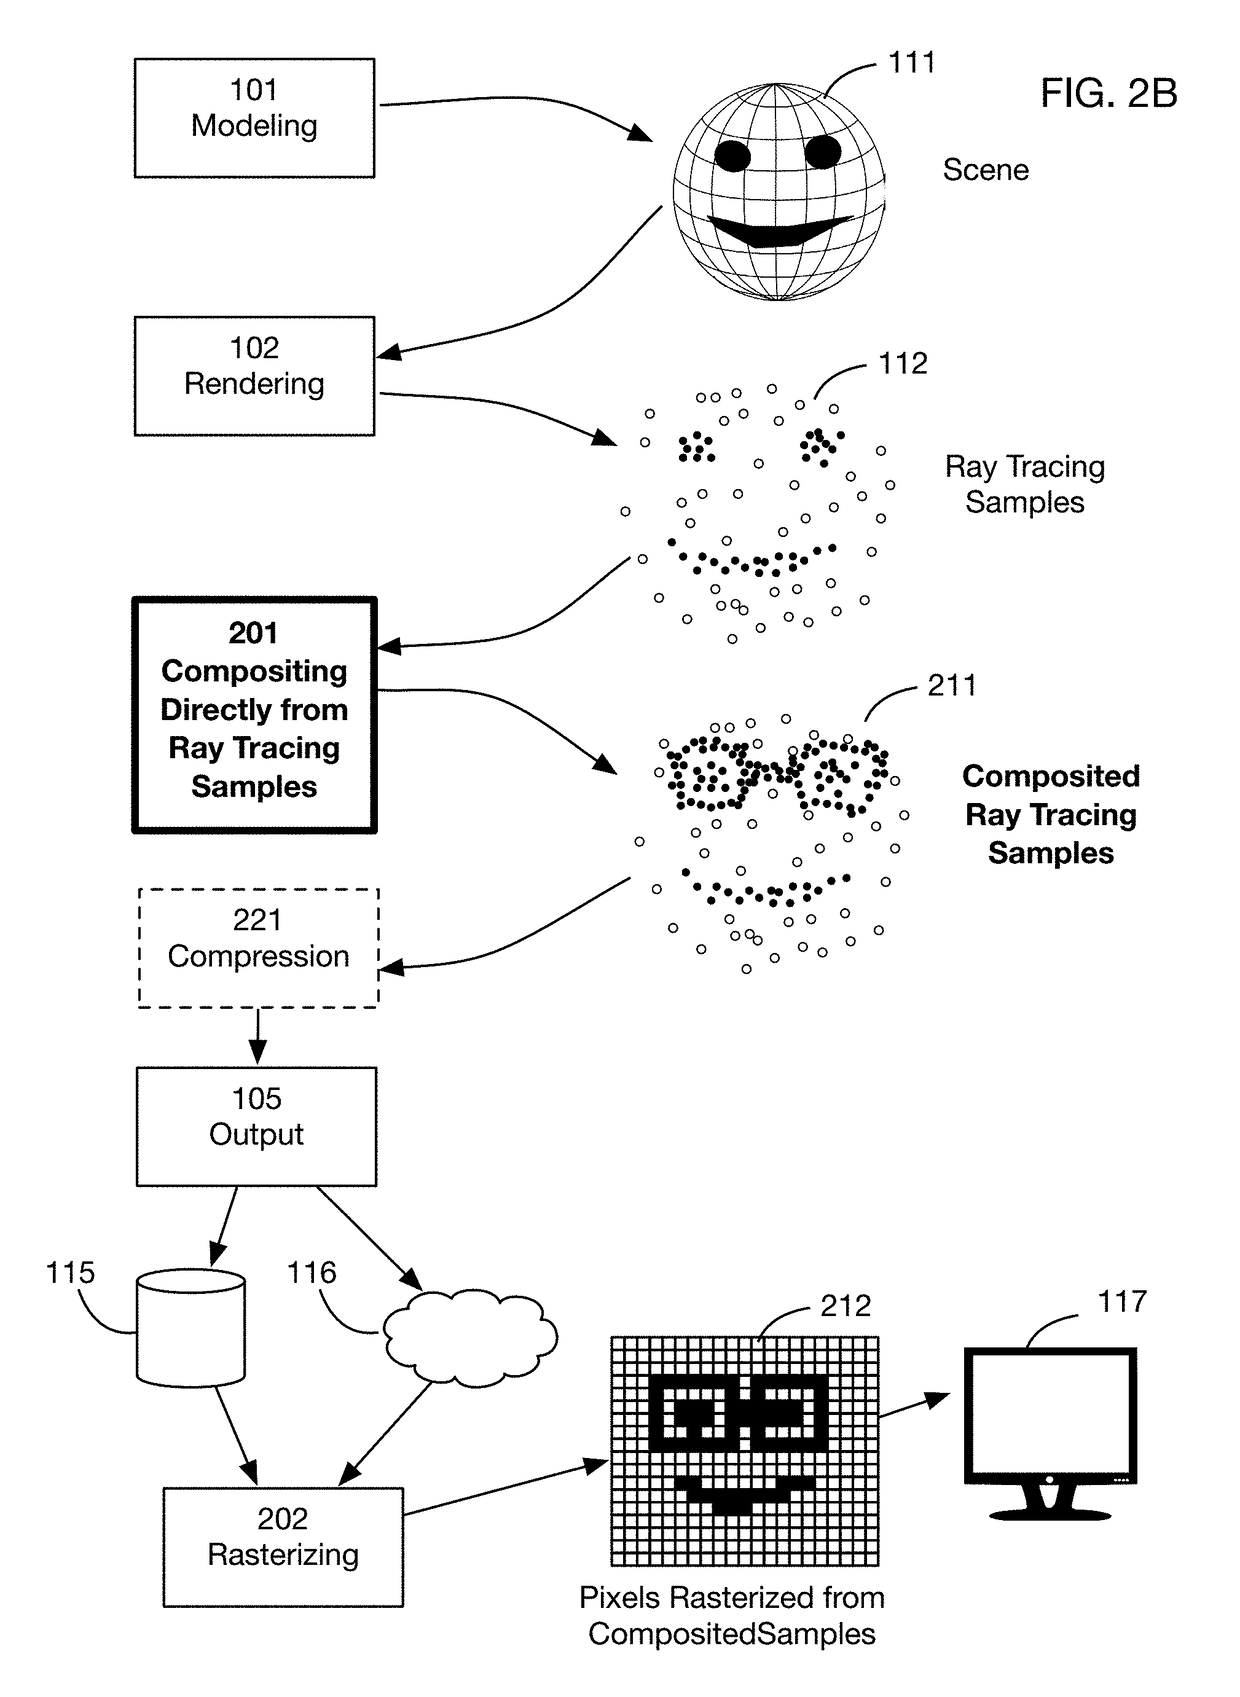 Method of modifying ray tracing samples after rendering and before rasterizing